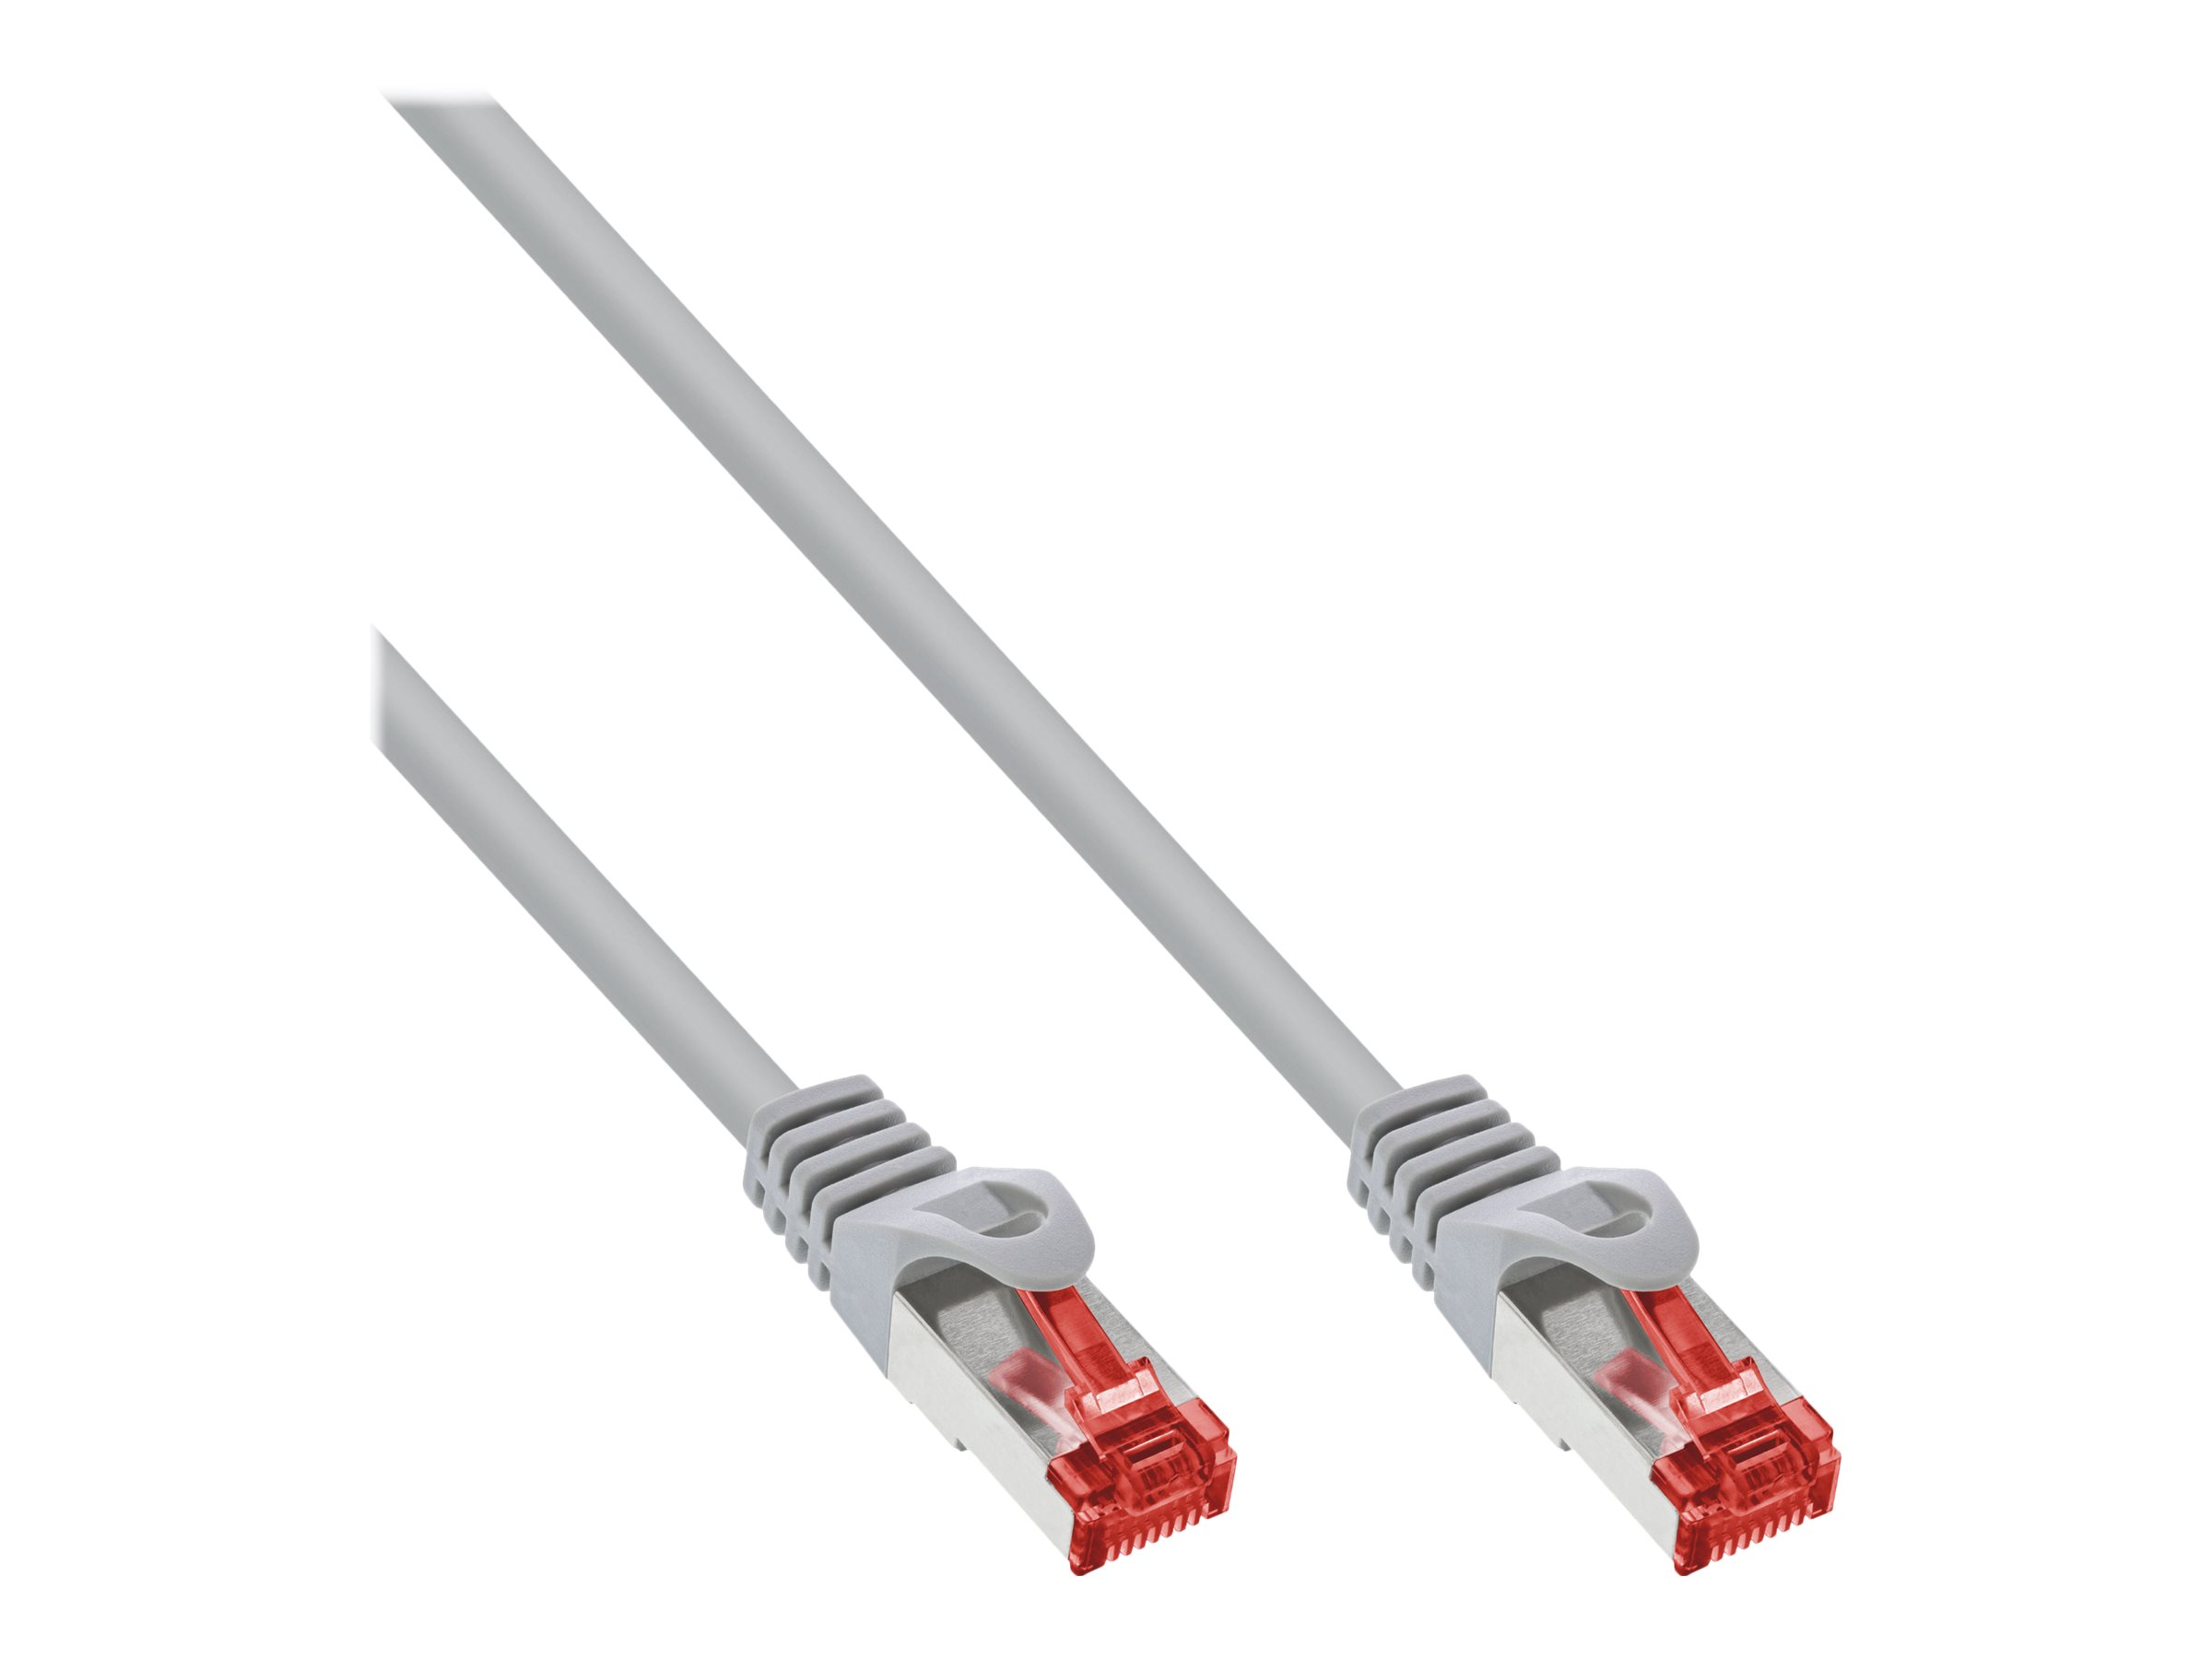 IT Cheap online in adapters OCTO shop the & AG cables